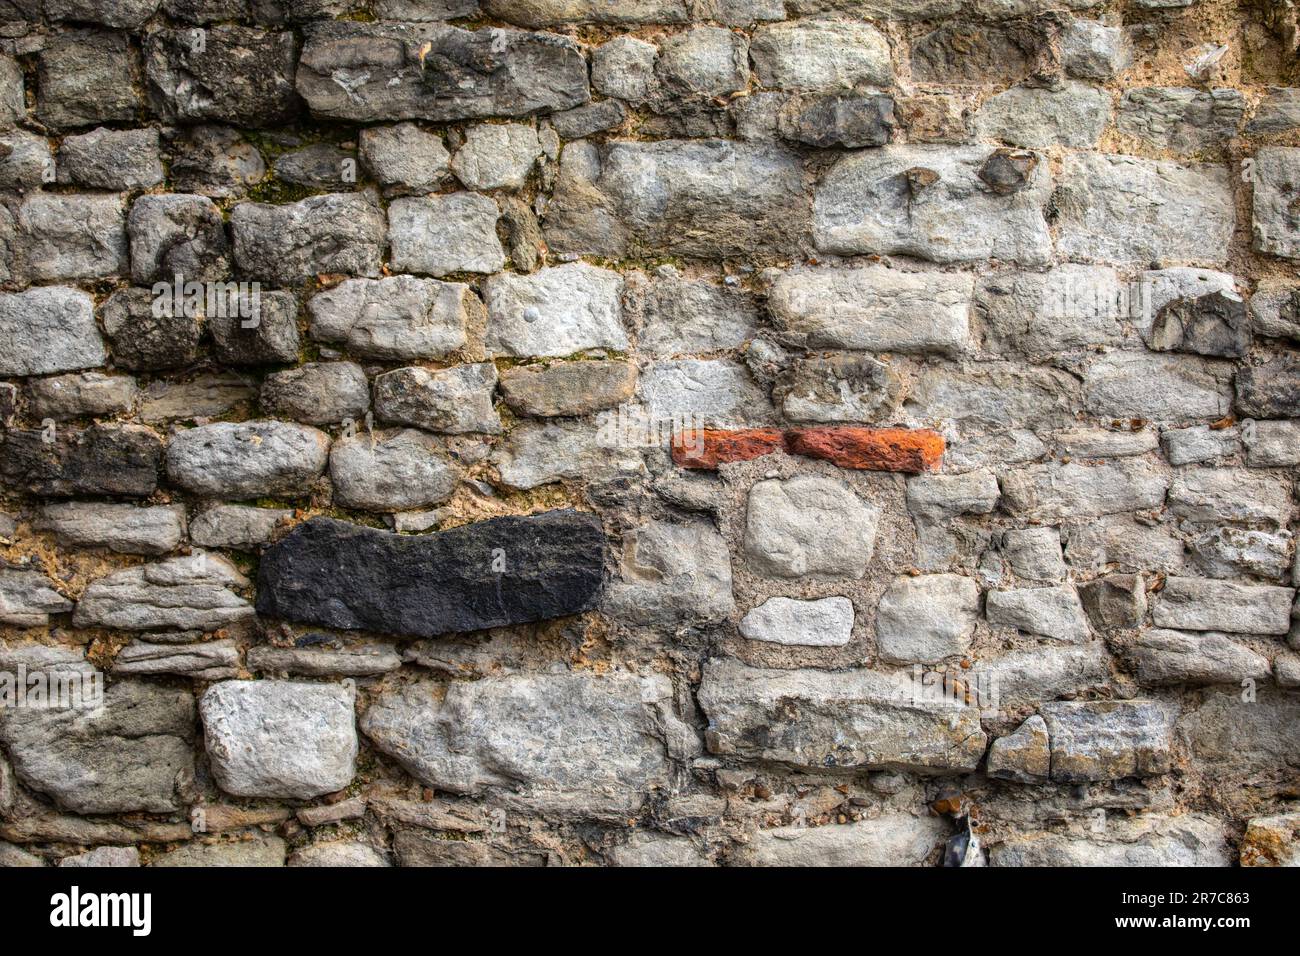 A detail of the remains of London Wall, located near Tower Hill in London, UK.  It was a defensive wall first built by the Romans around what was then Stock Photo